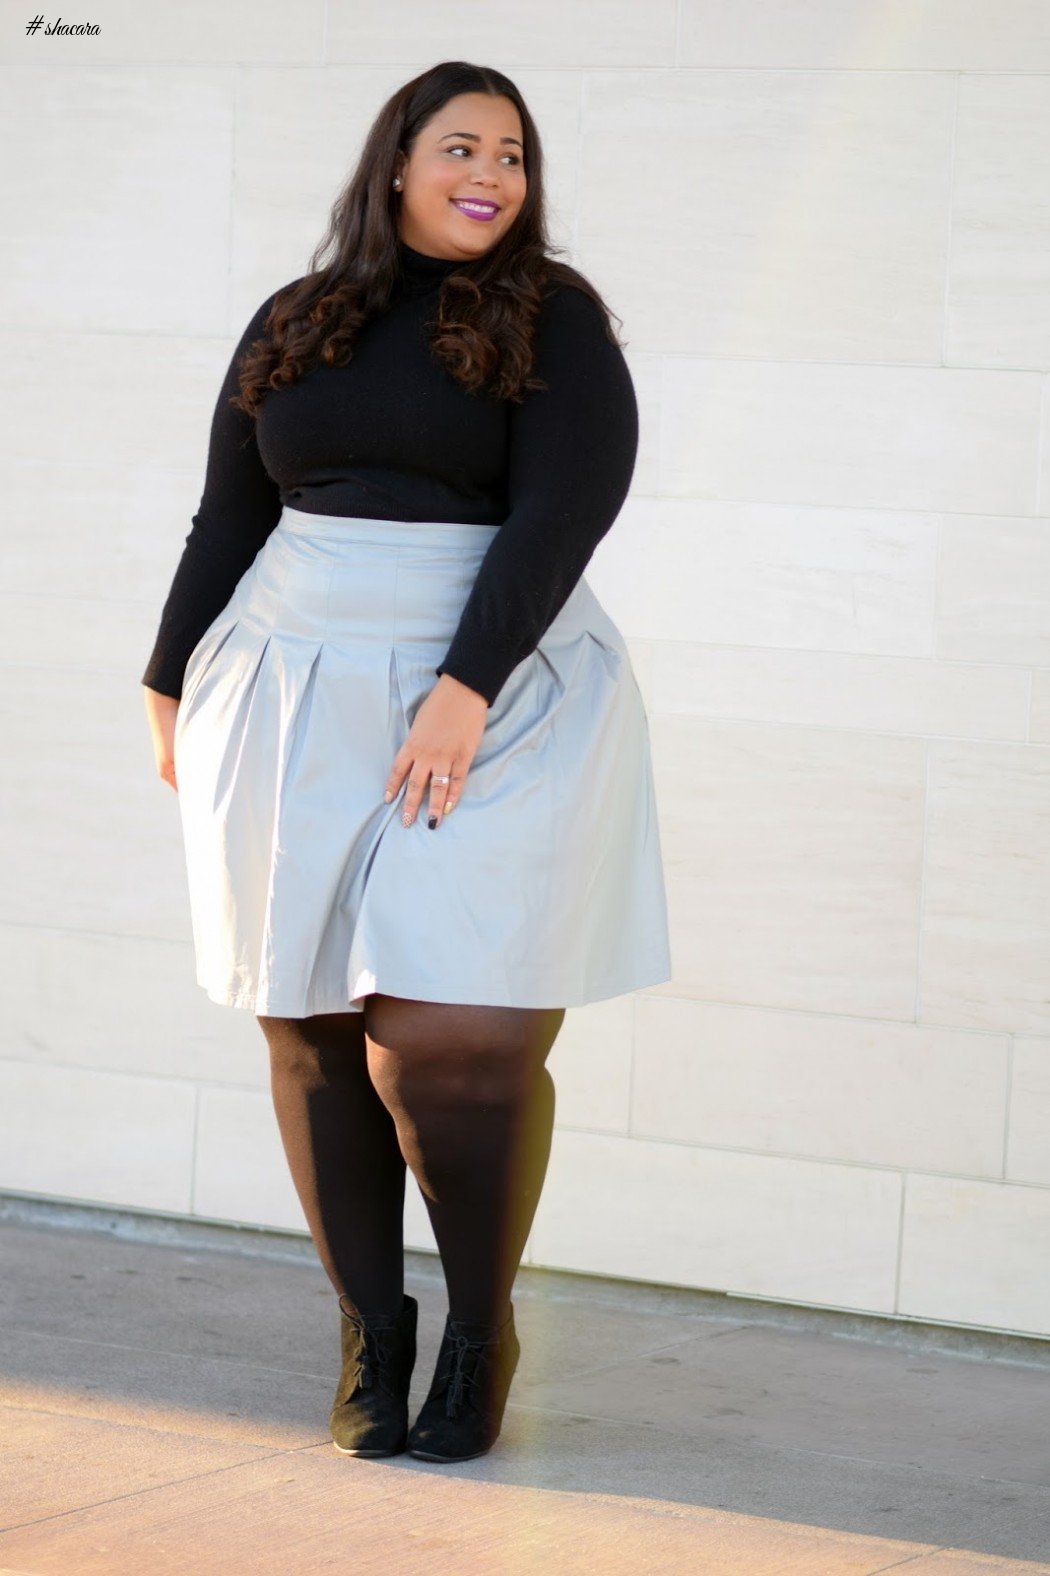 HOW TO SLAY IN WORK OUTFITS THIS WEEK AS A PLUS SIZE LADY